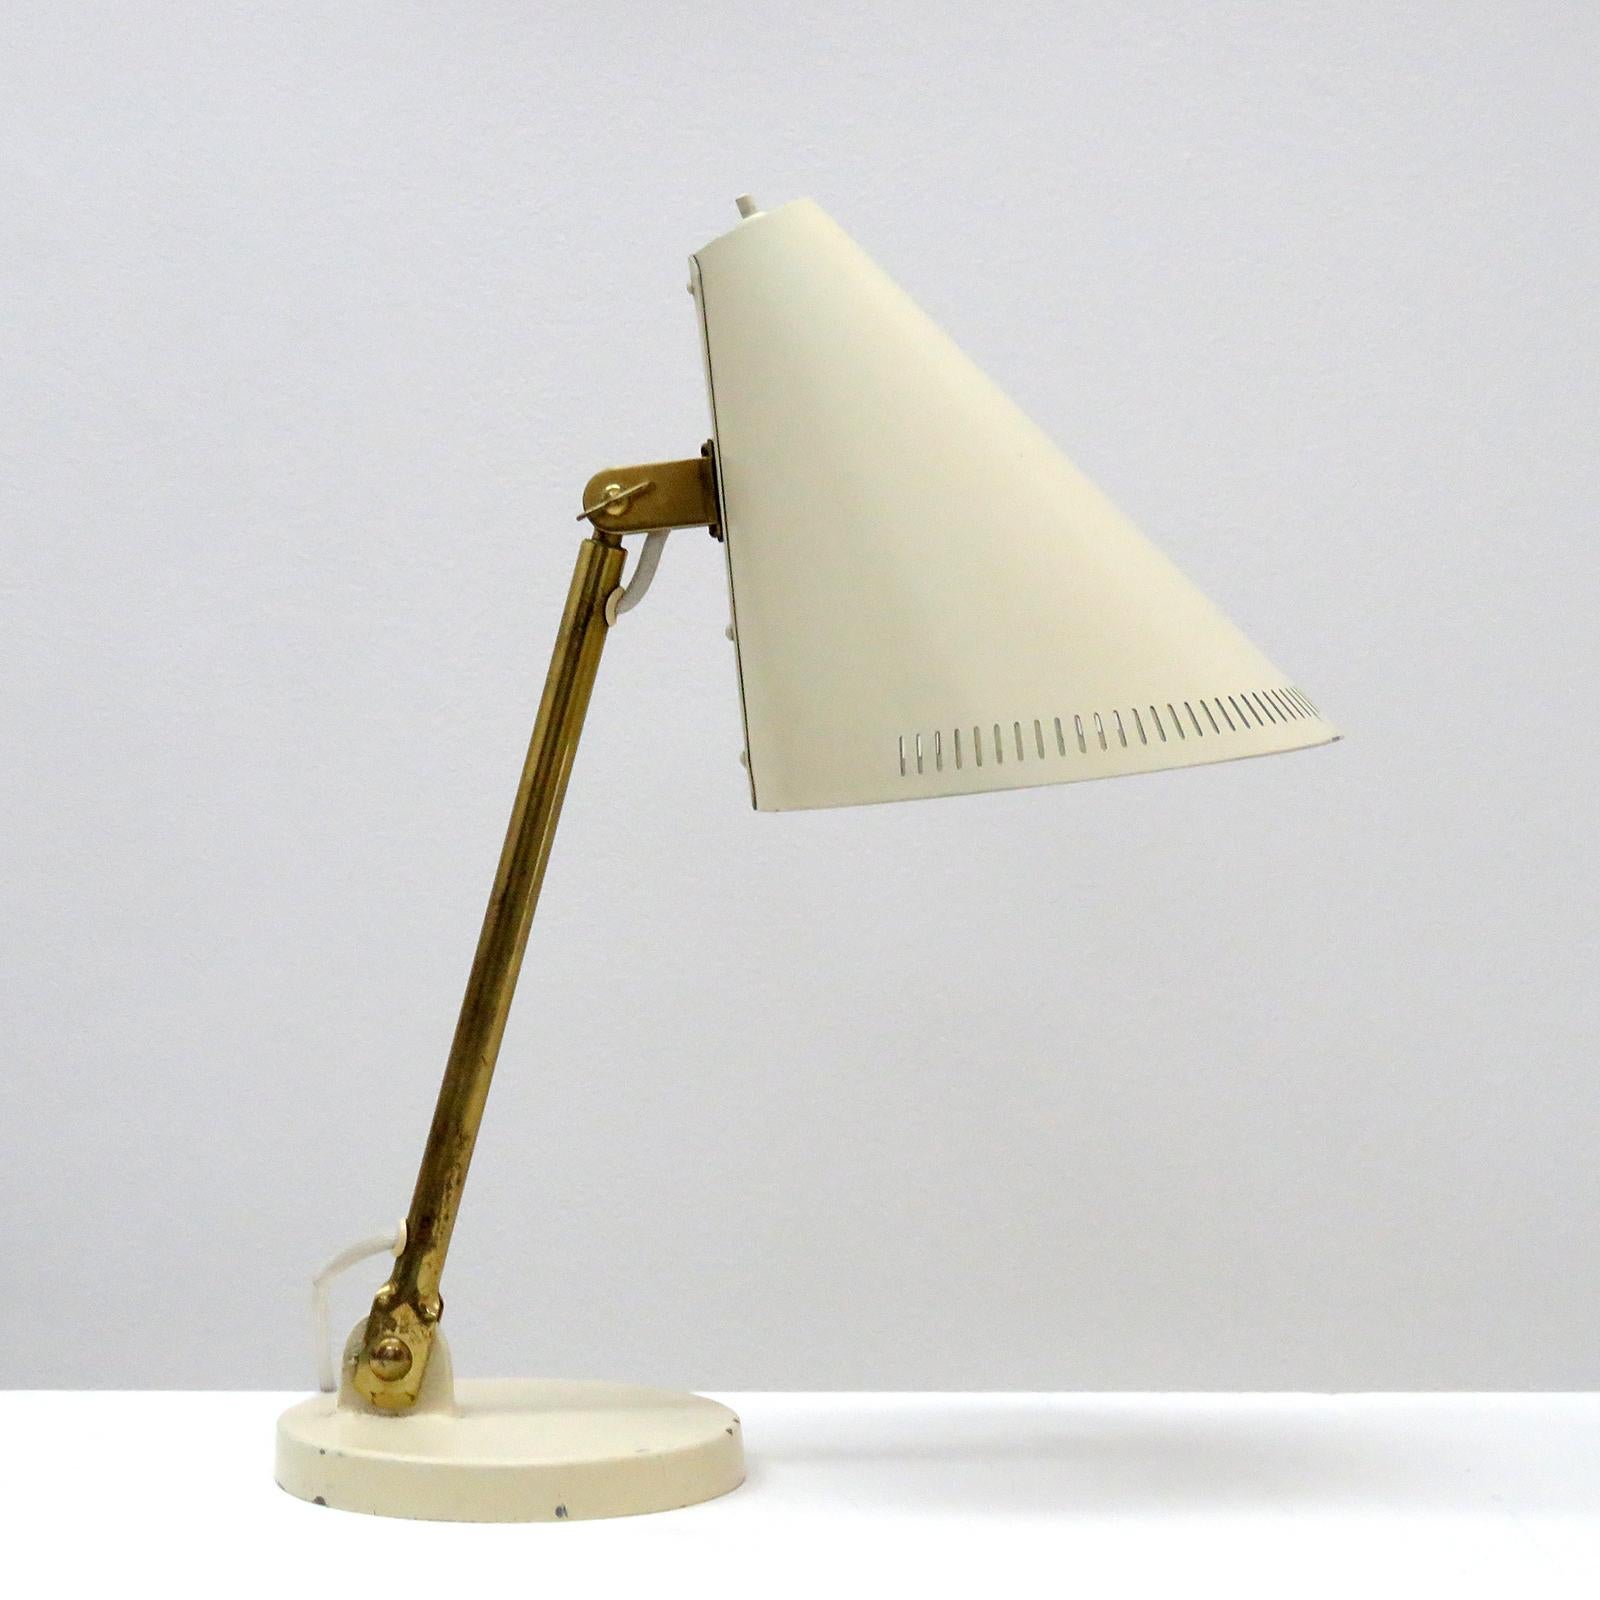 Wonderful early desk lamp model 5305 by Paavo Tynell for Taito, Finland, with a large articulate crème colored enameled shade and base, the shade is partially perforated and the brass arm is adjustable, stamped OY Taito 9222 at the shade.